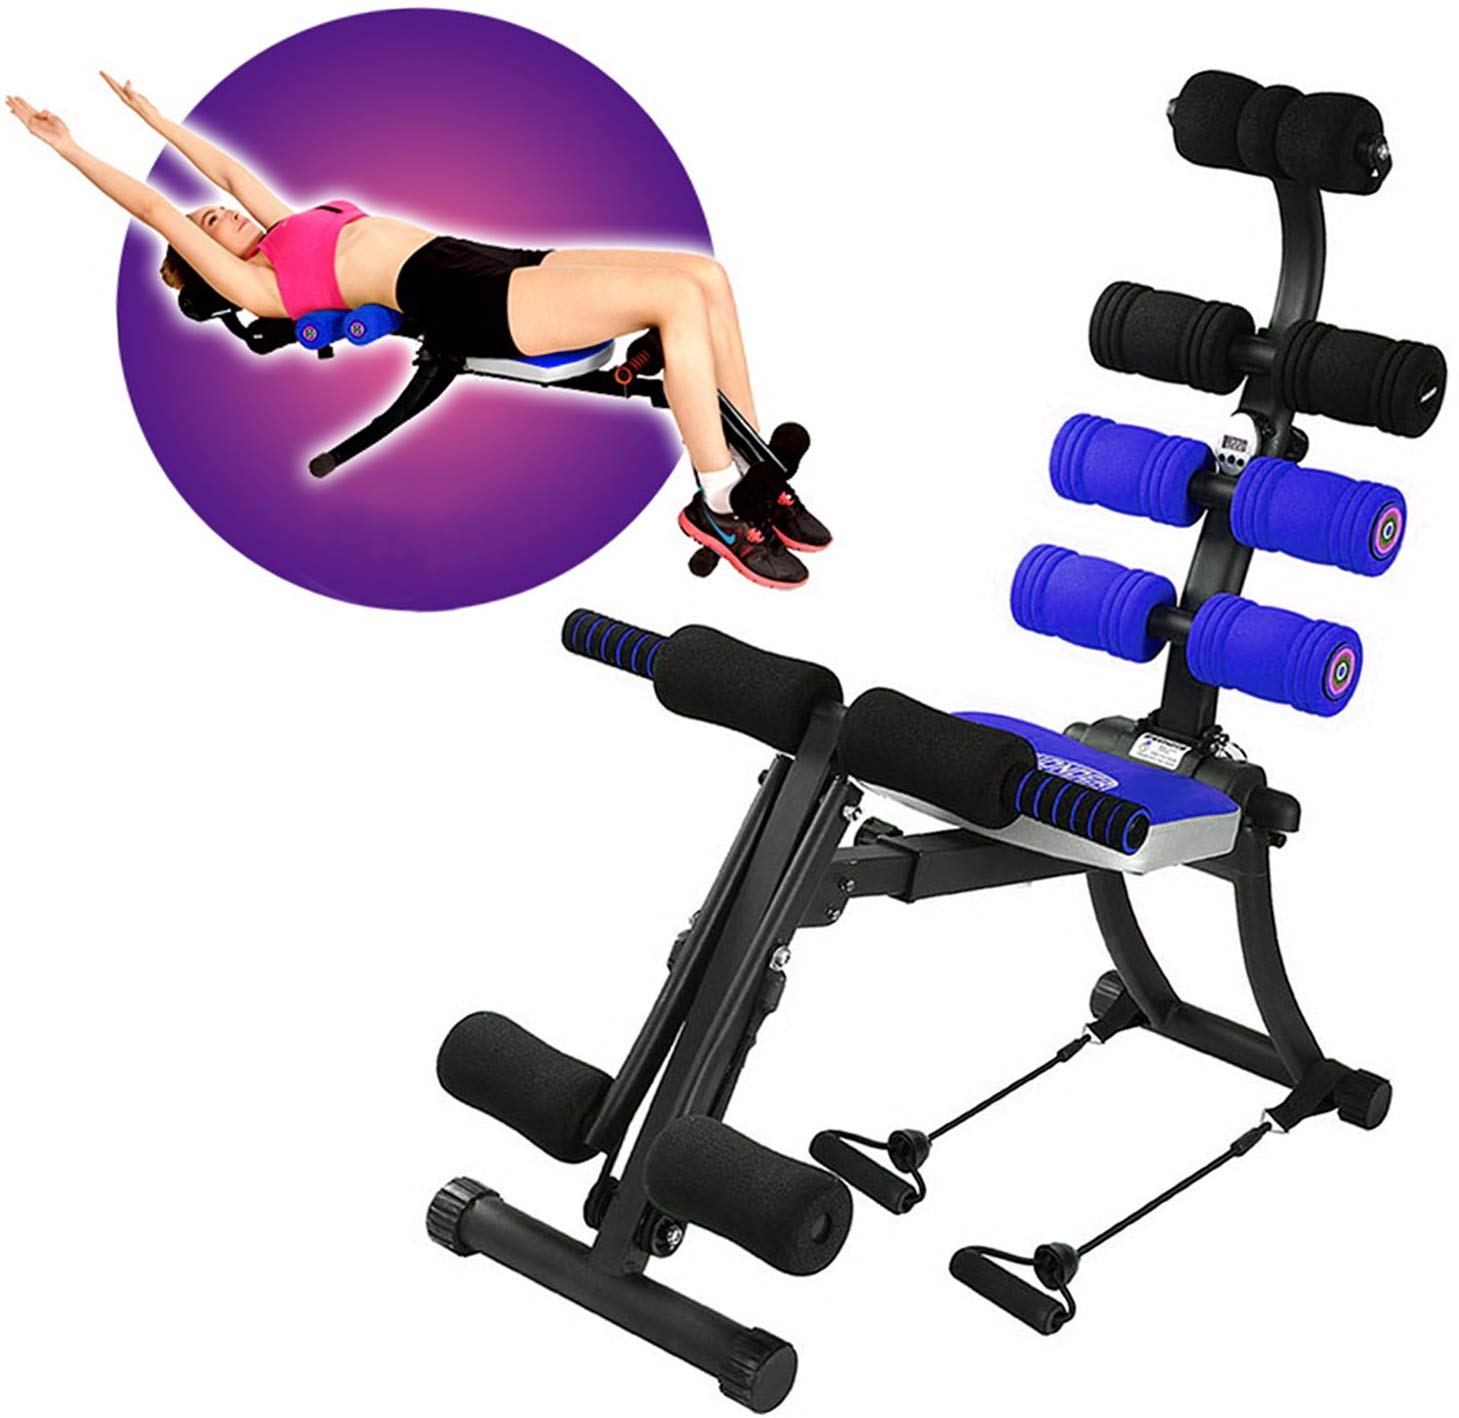 SYOSIN (22 in 1 Foldable Ab Exercise Machine Gym Trainer Whole Body Exercise Equipment